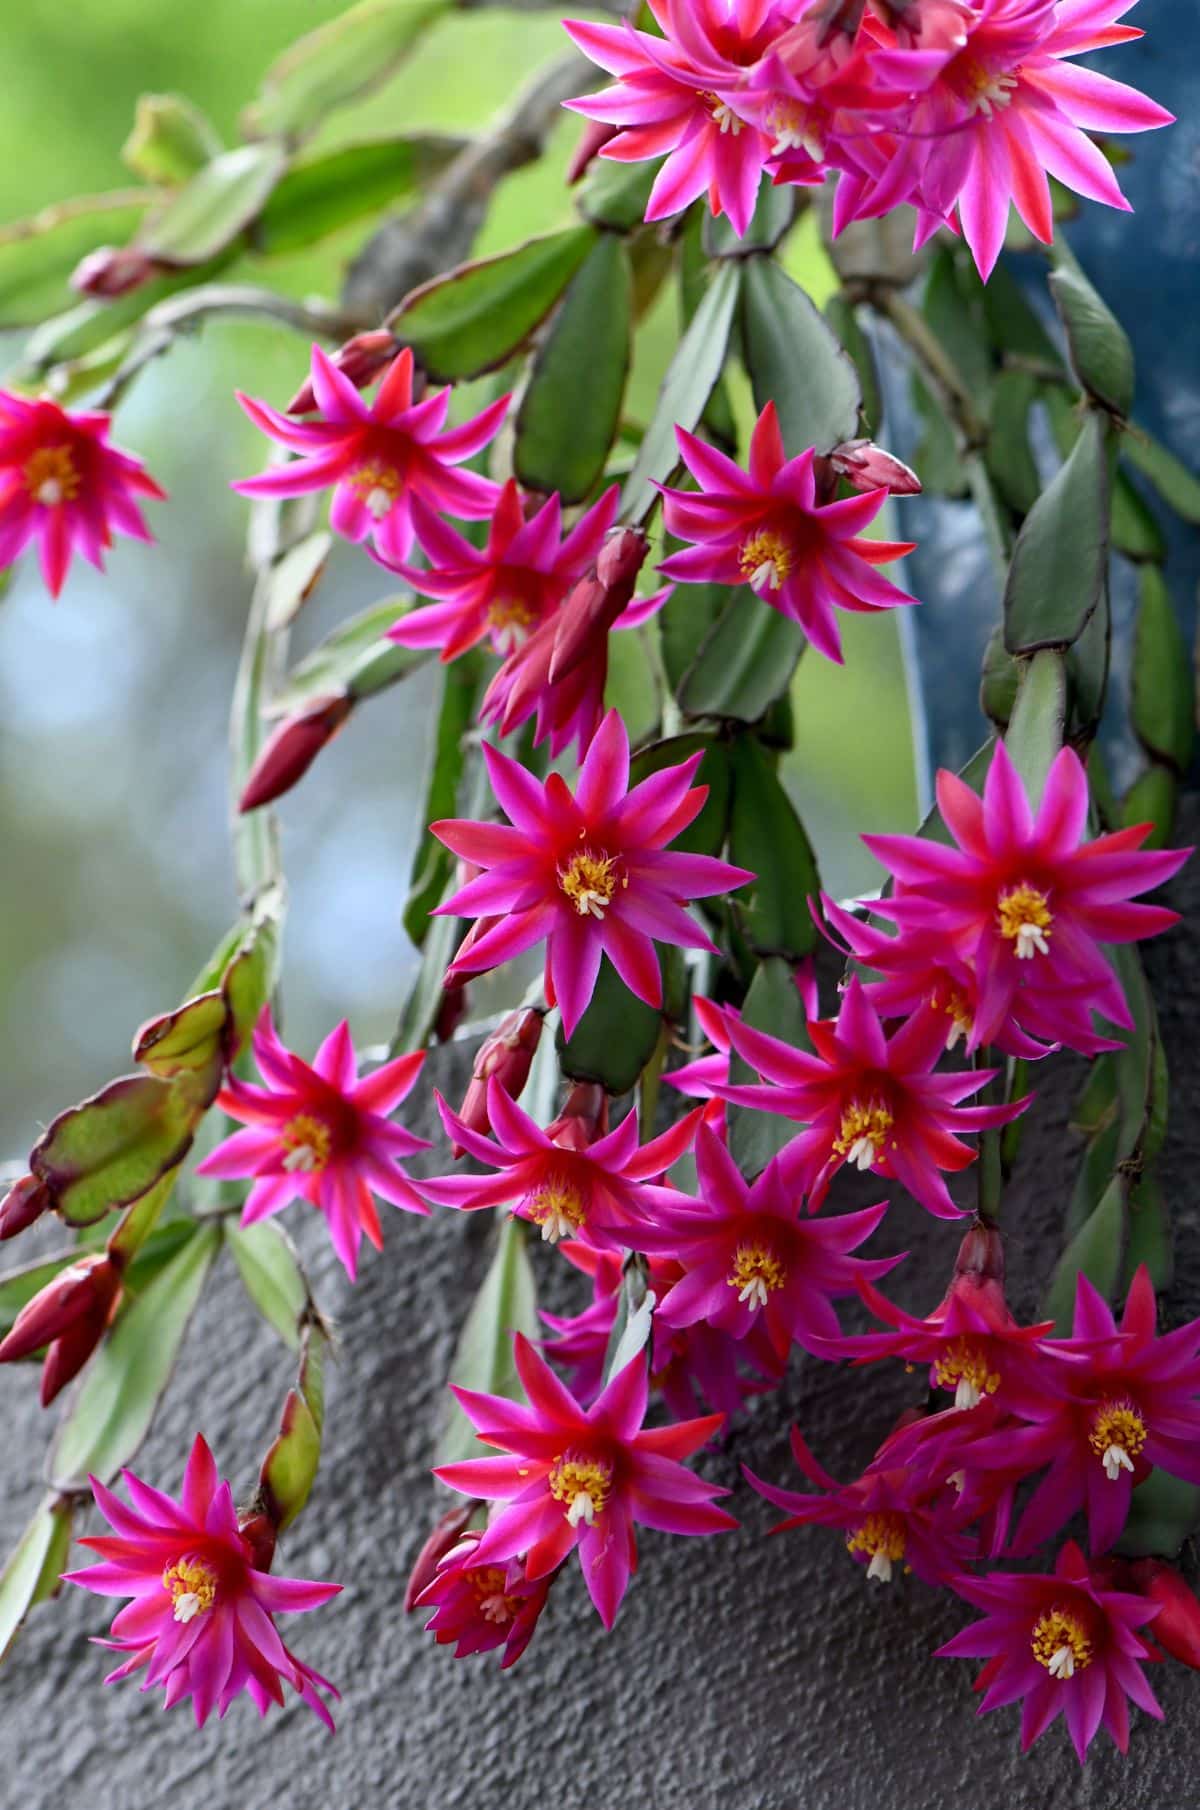 A pink Easter cactus plant with bright, flaring, trumpet-like blossoms.